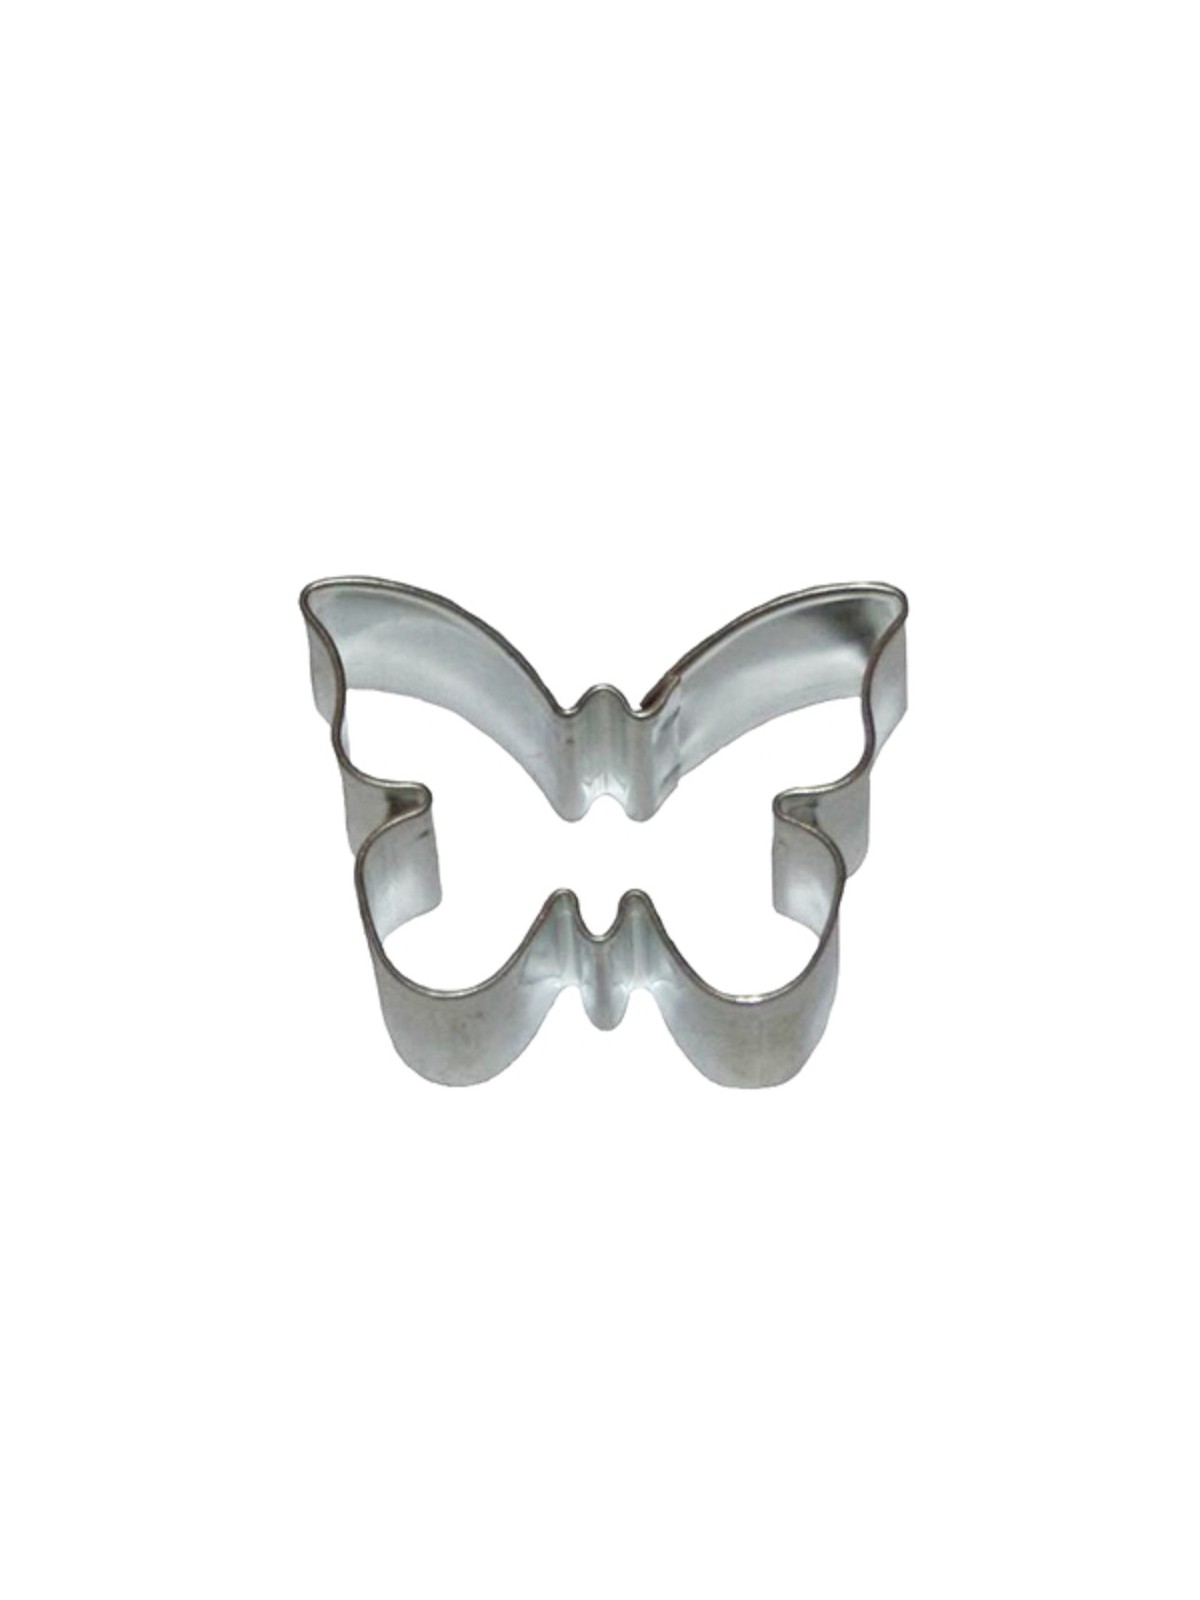 Cookie cutter - Small butterfly